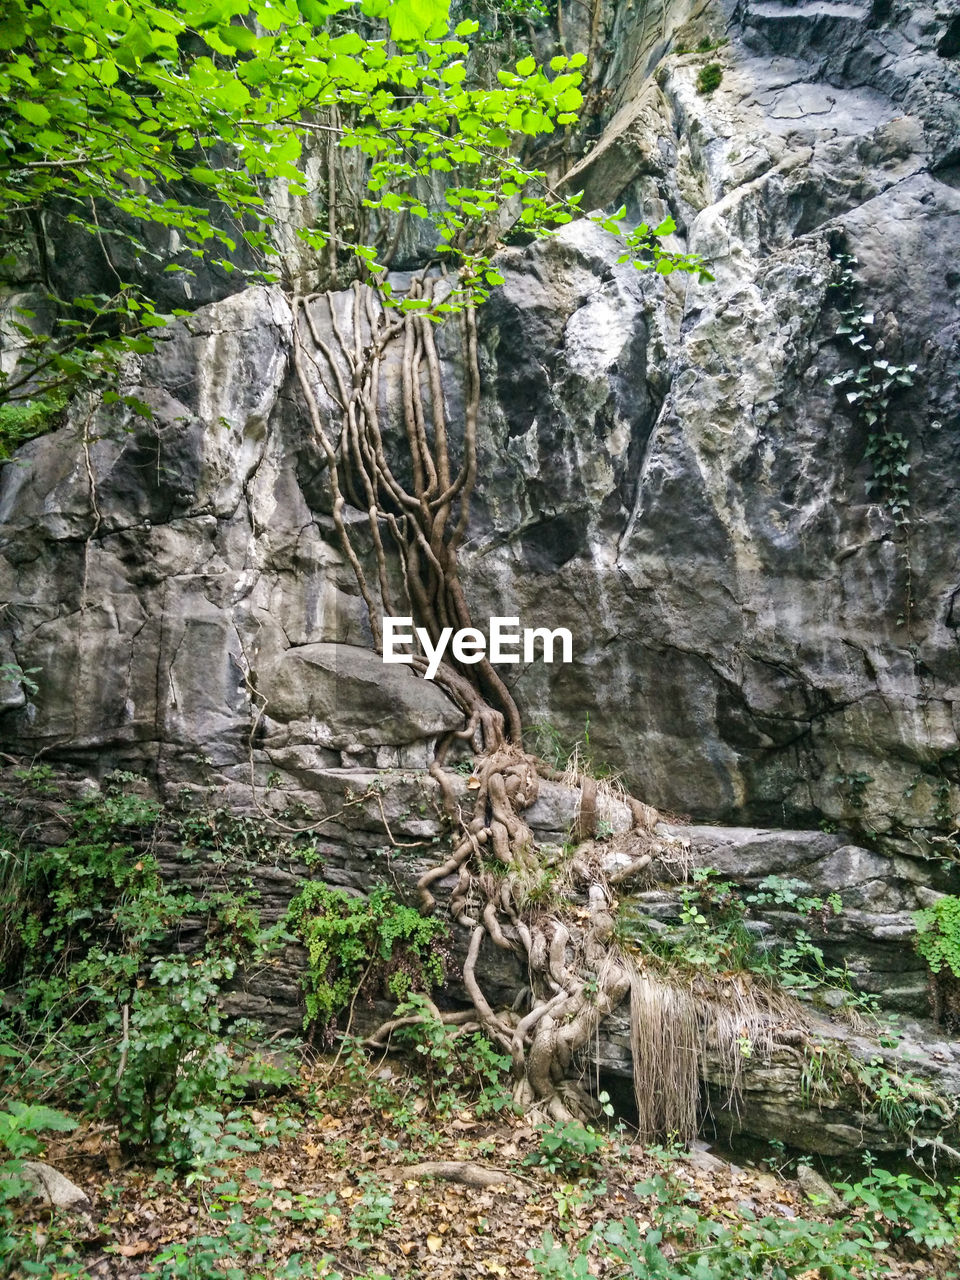 PLANTS AND TREES GROWING IN ROCK